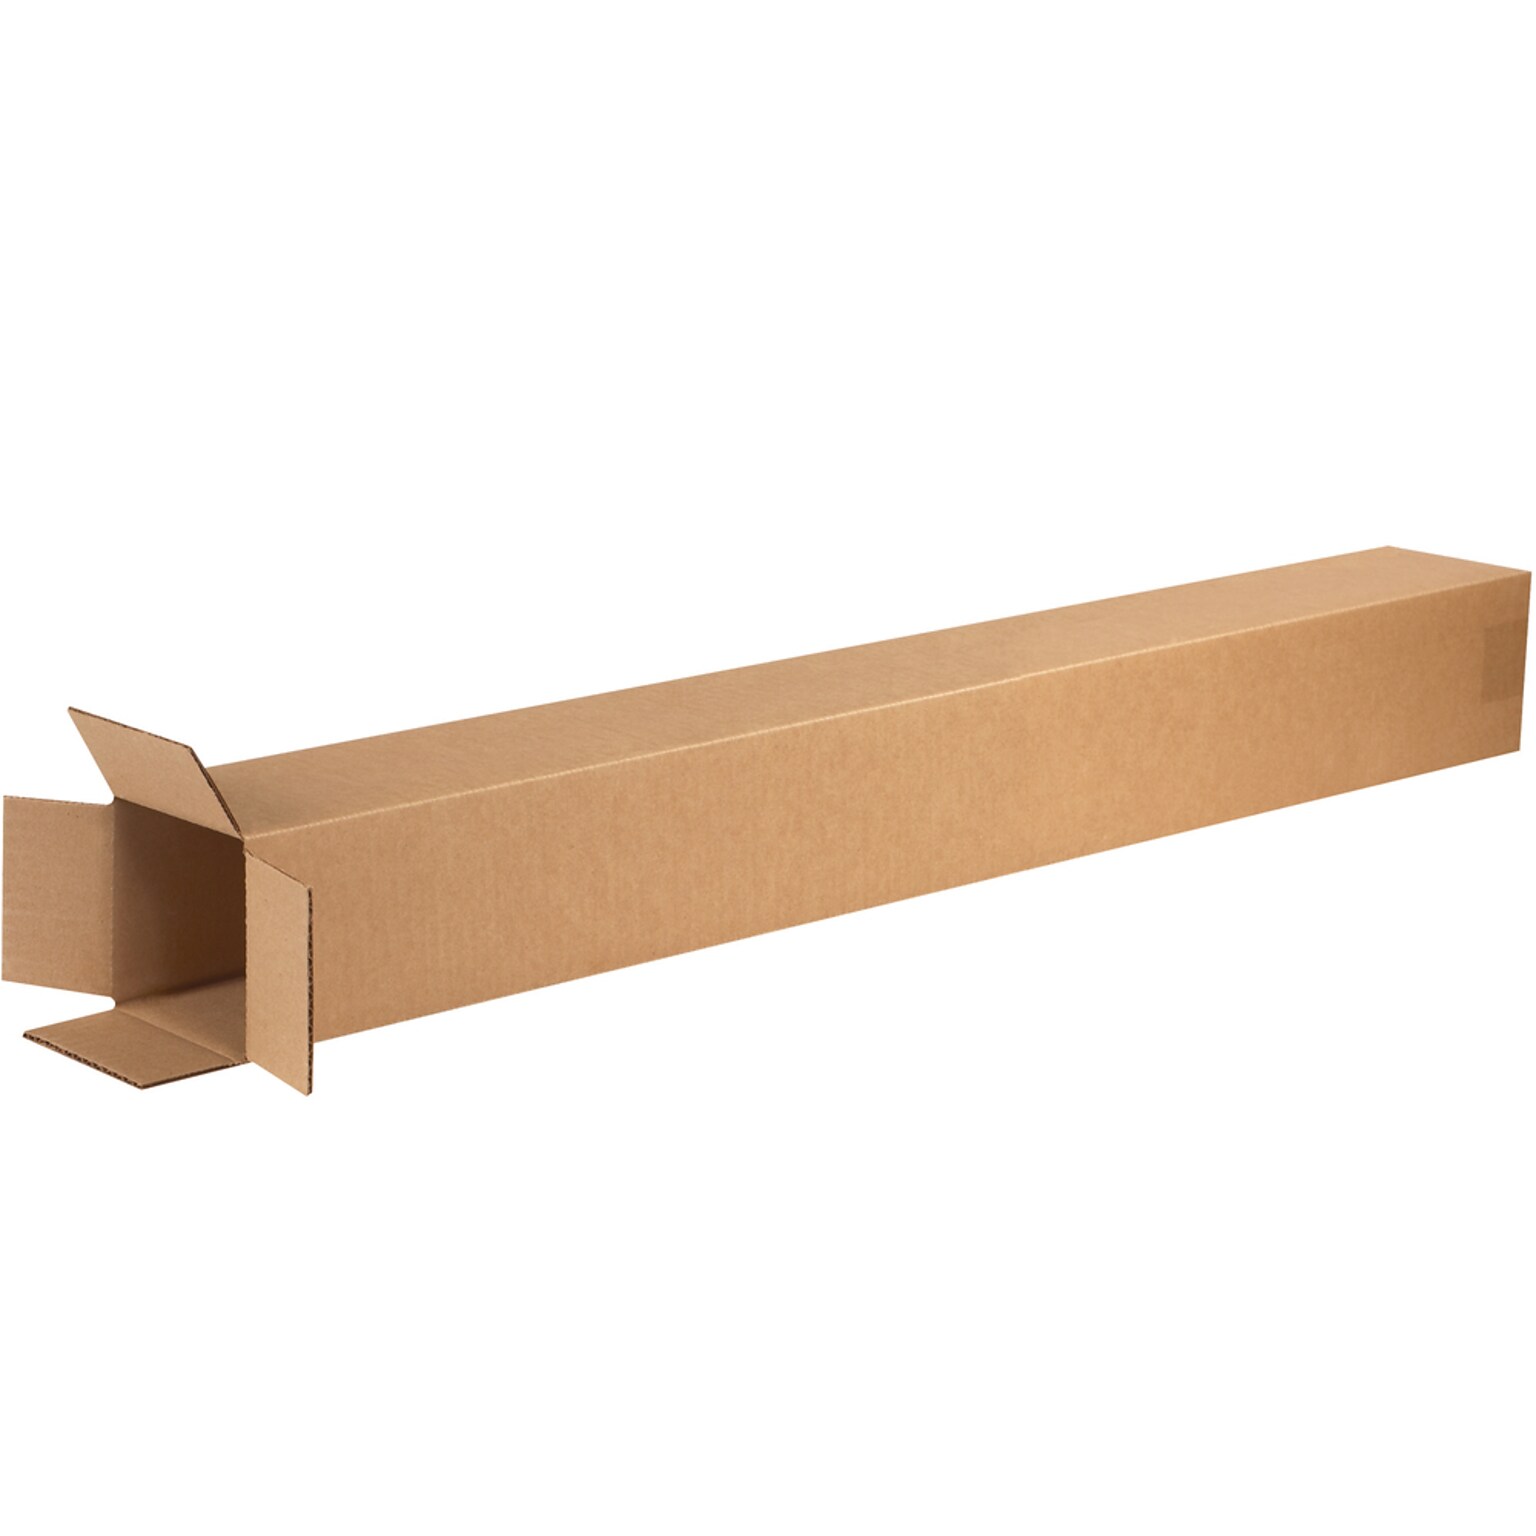 Quill Brand 4 x 4 x 40 Corrugated Shipping Boxes, 200#/ECT-32 Mullen Rated Corrugated, Pack of 25, (4440)